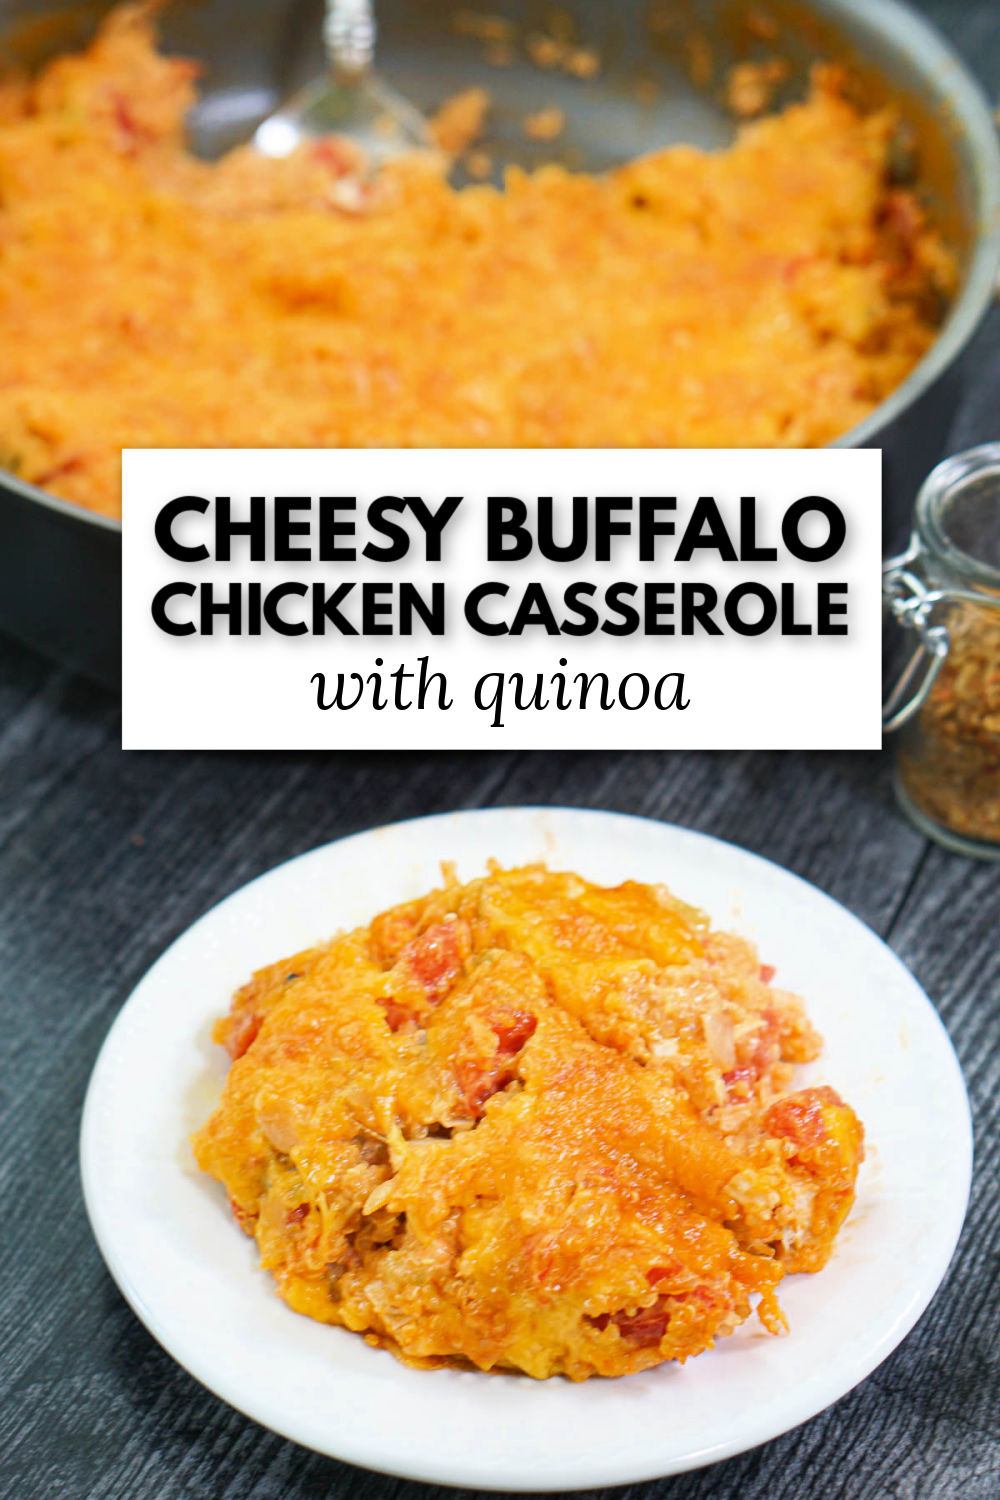 skillet and plate with the buffalo chicken casserole with text